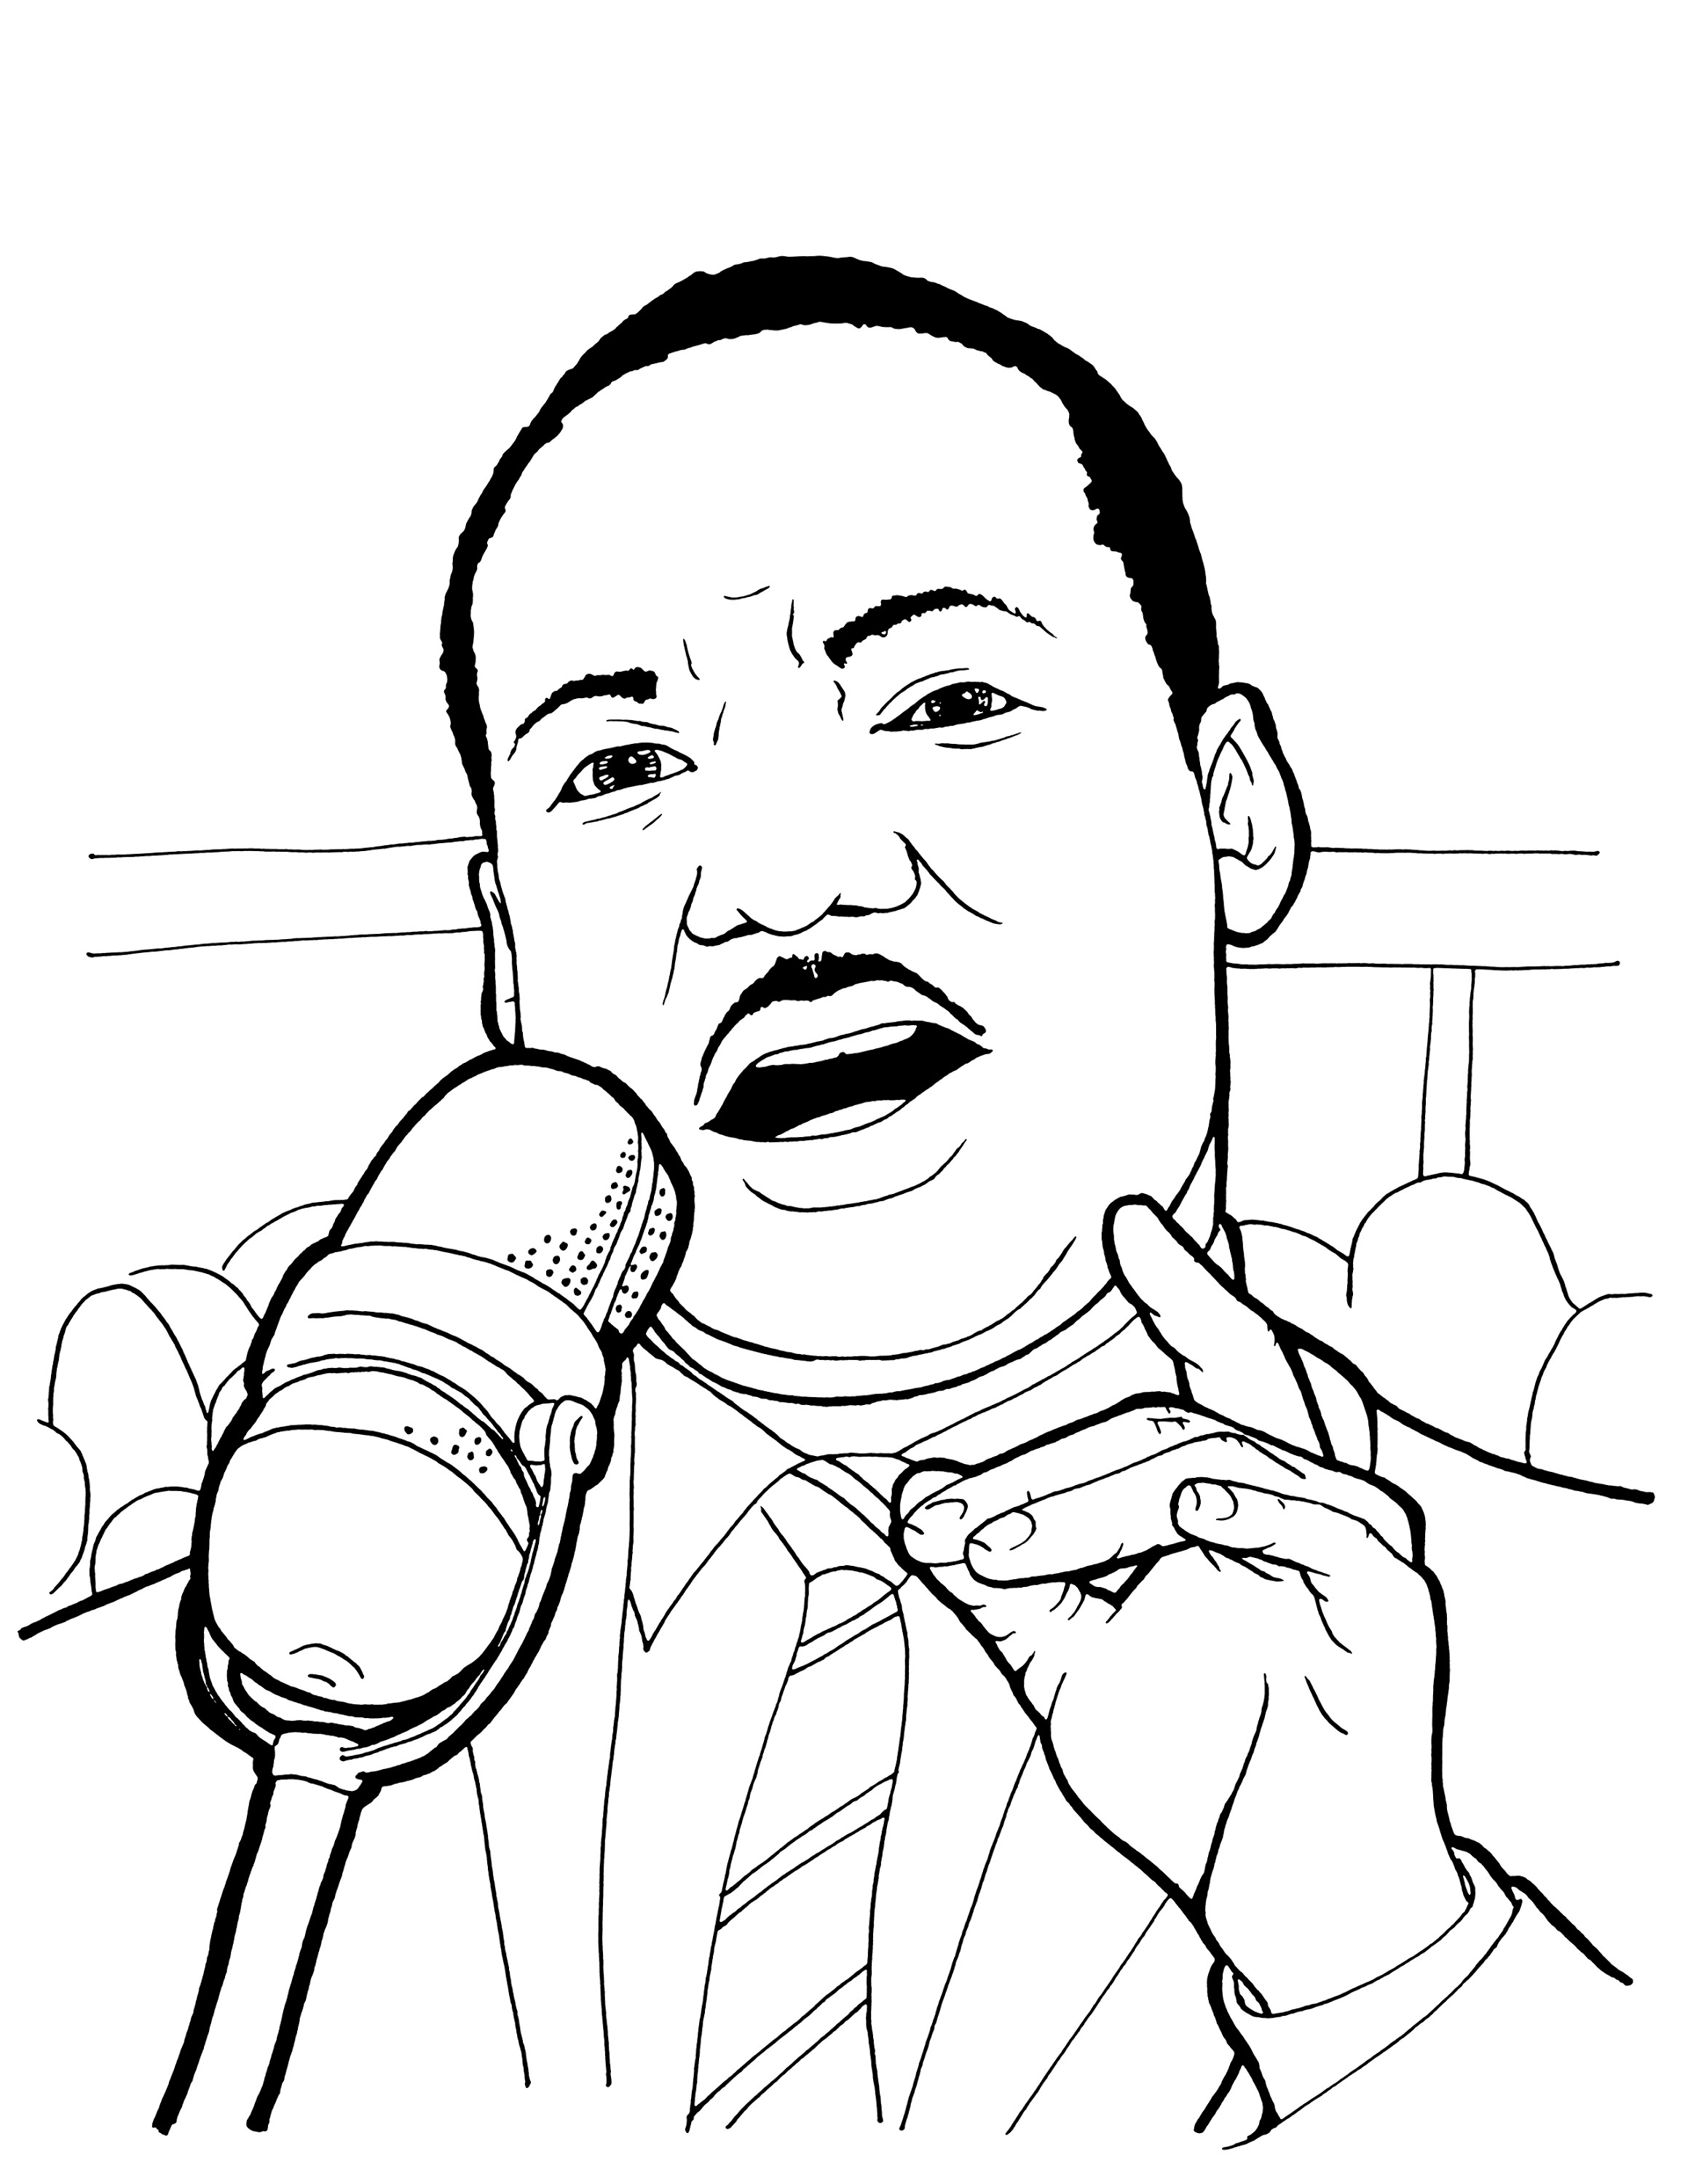 Martin Luther King Jr Drawing Step By Step How To Draw Martin Luther